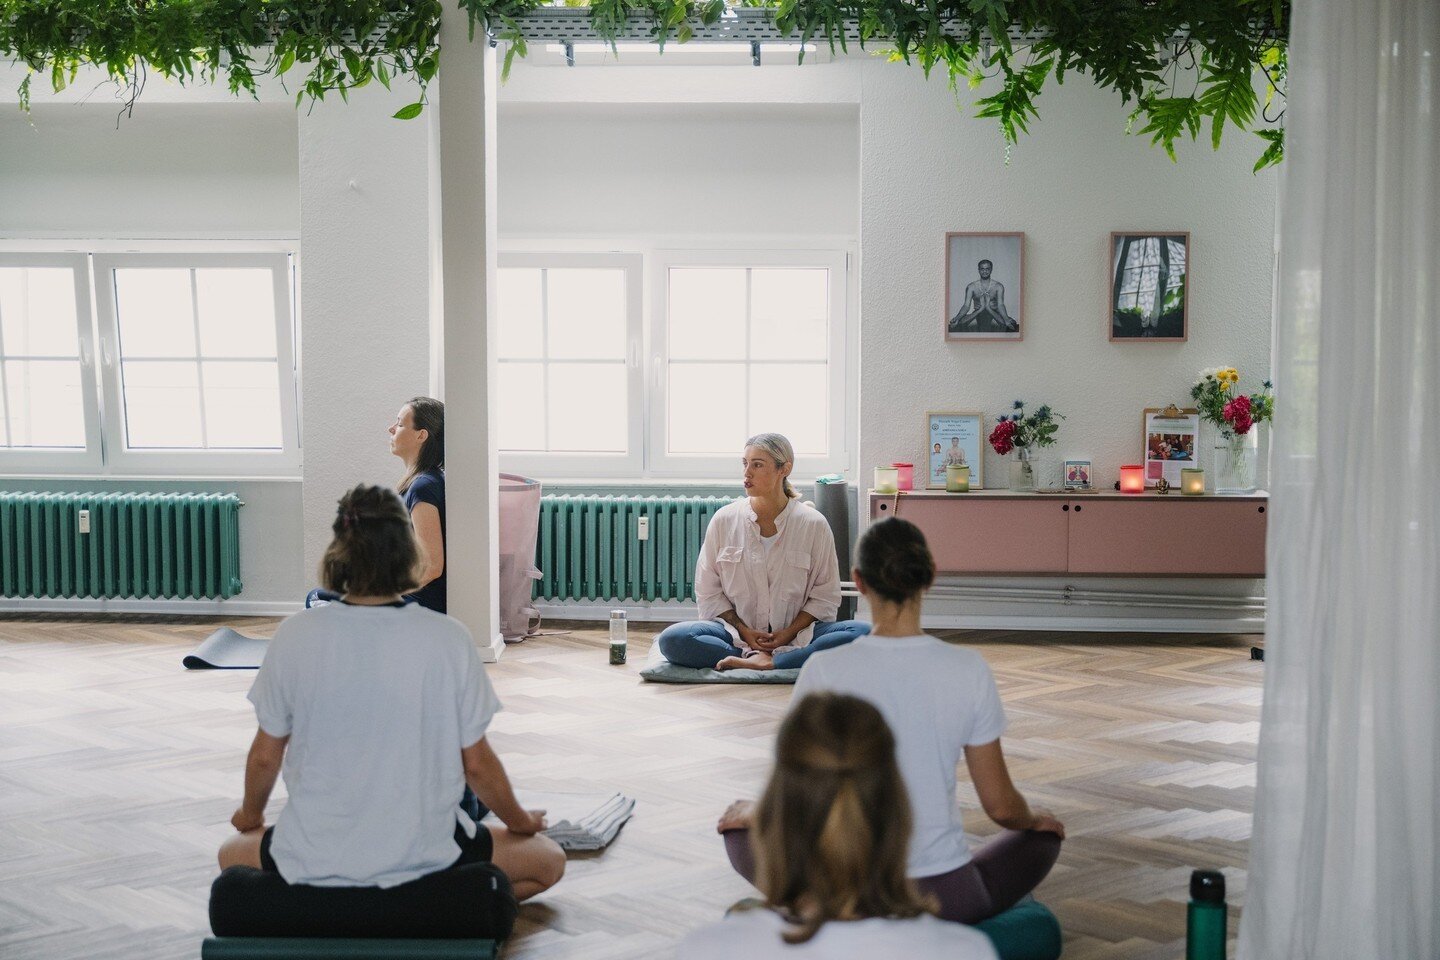 Fifth Season Recharge - Ashtanga Yoga Day Retreat⁠
.⁠
Whether you wish to take a break in-between celebrating to recharge or are hoping to avoid Karneval altogether, we are happy to provide a calm escape right in the centre of Bonn.⁠
.⁠
Join us on Sa